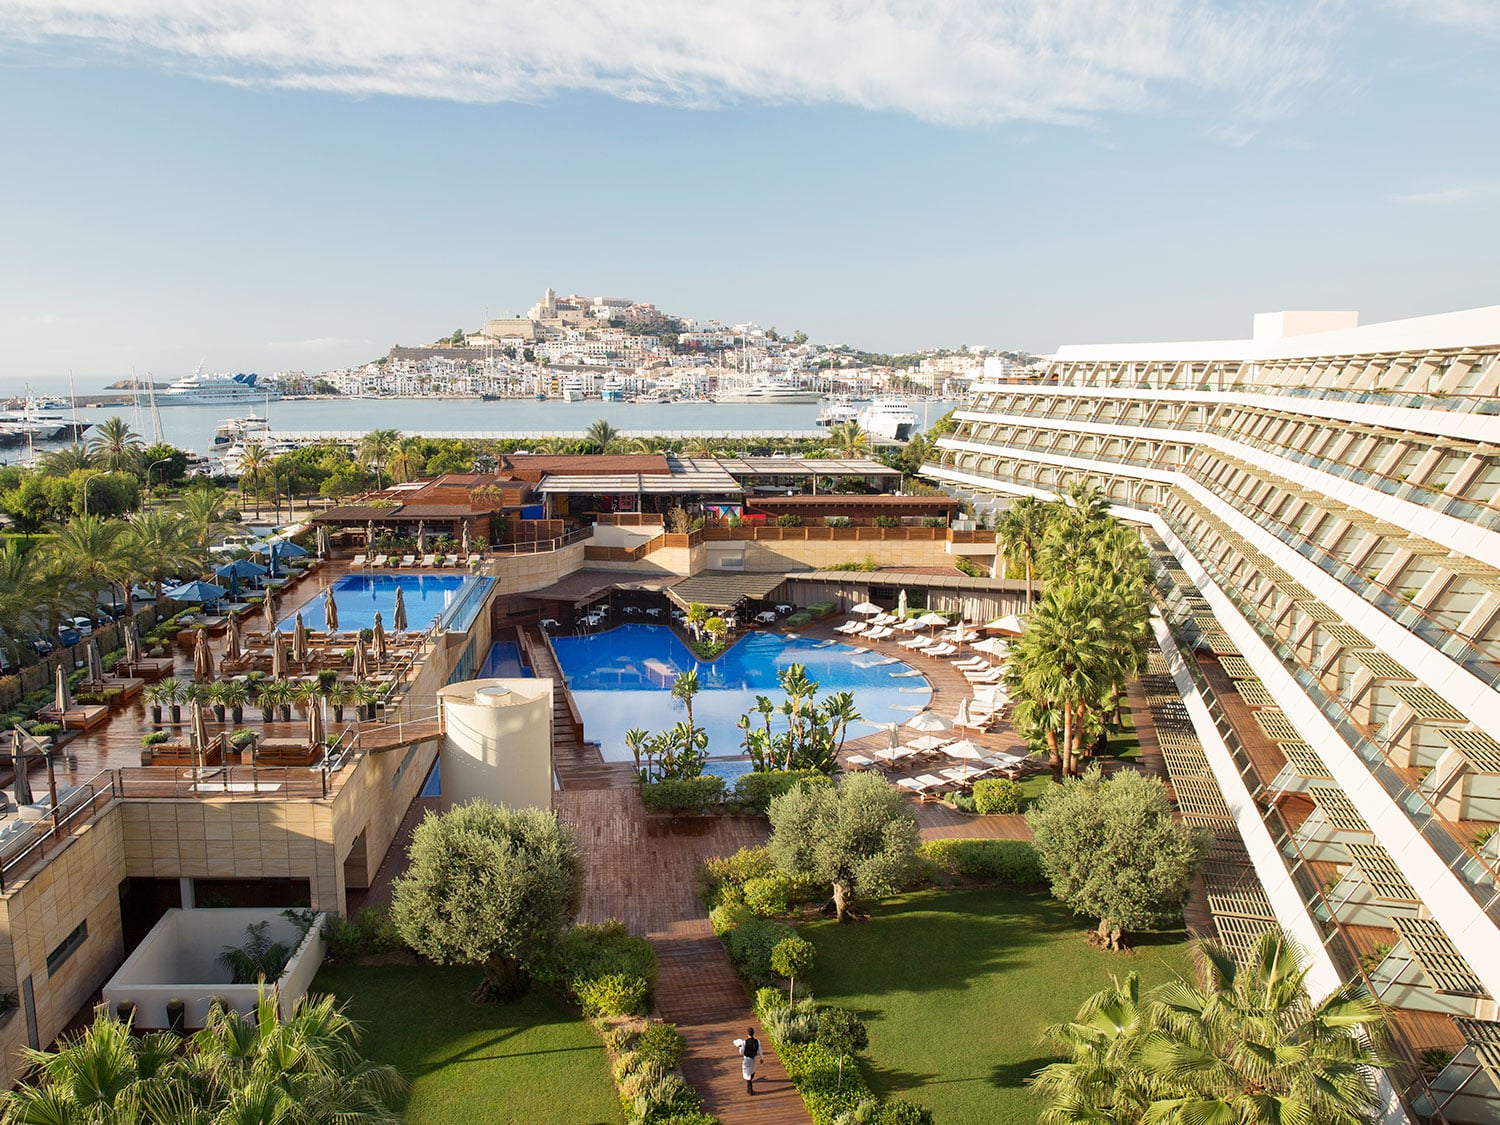 An aerial exterior view of Ibiza Gran Hotel in Spain’s Balearic Islands.